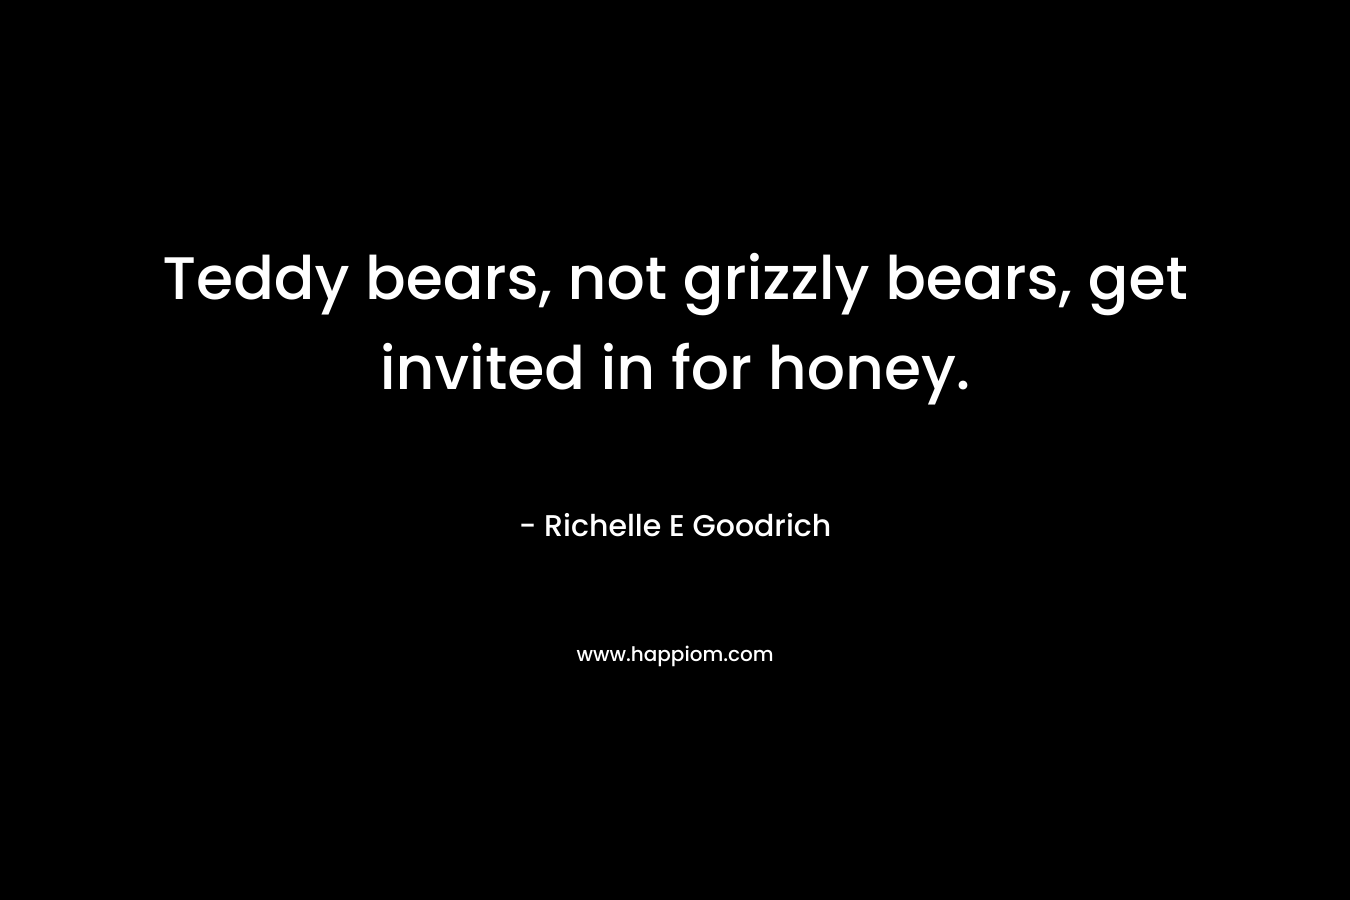 Teddy bears, not grizzly bears, get invited in for honey. – Richelle E Goodrich